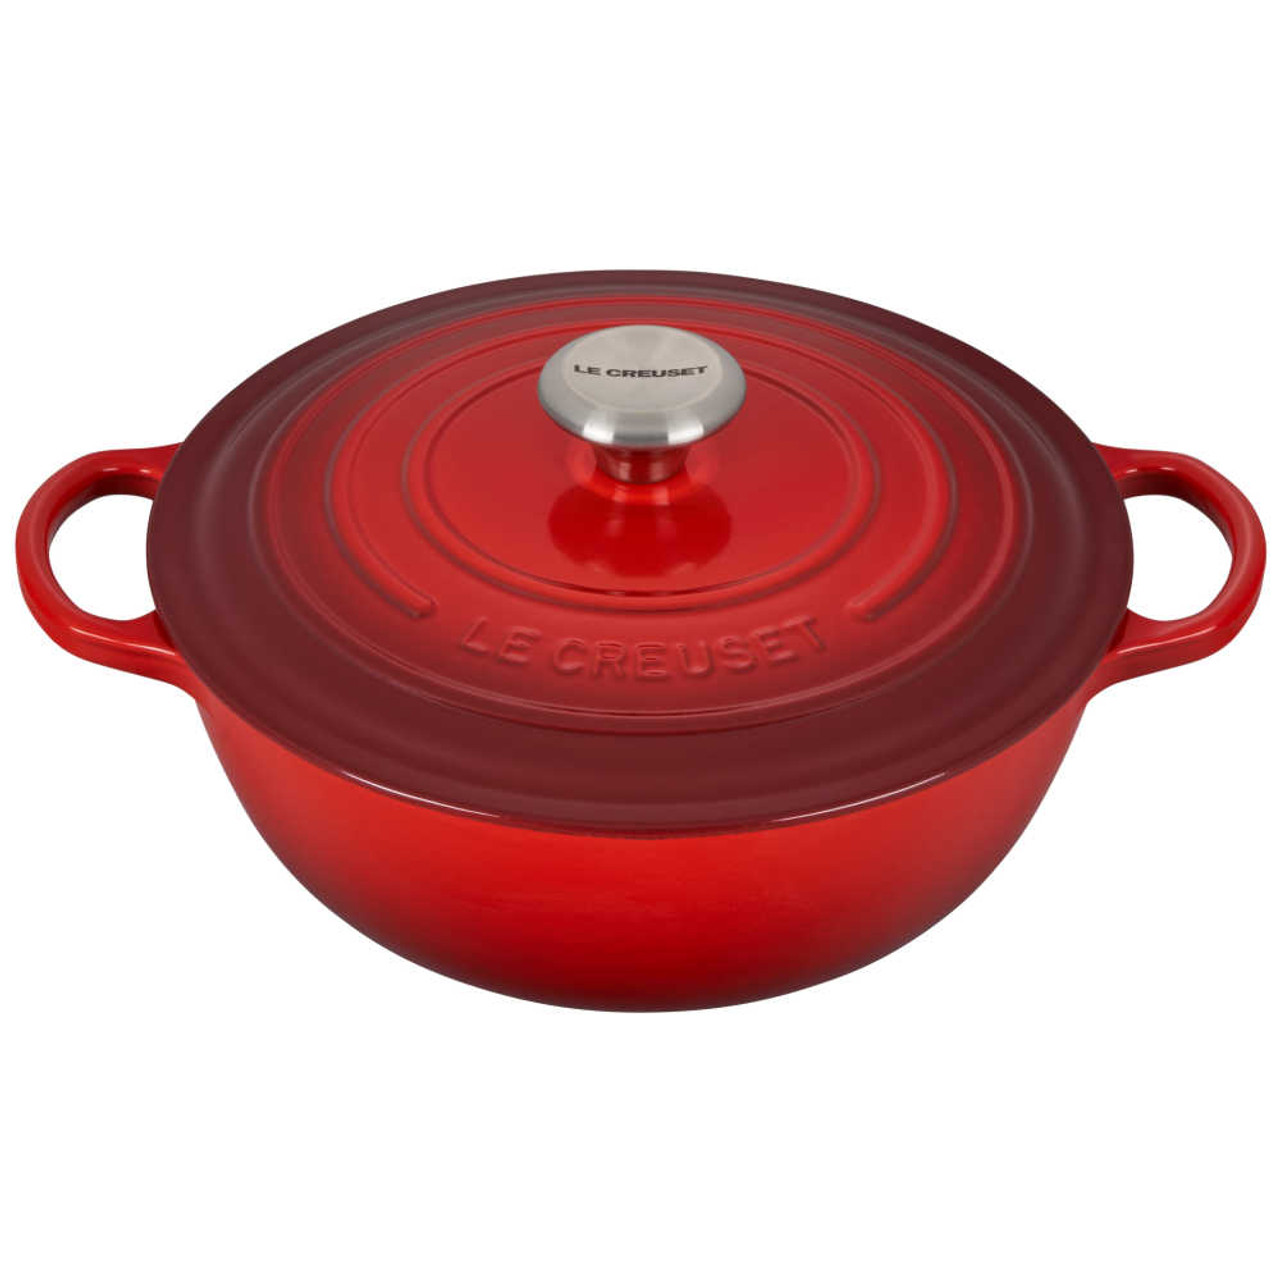 https://cdn11.bigcommerce.com/s-hccytny0od/images/stencil/1280x1280/products/5357/23239/Le_Creuset_Signature_Chefs_Oven_in_Cerise__37257.1680121381.jpg?c=2?imbypass=on